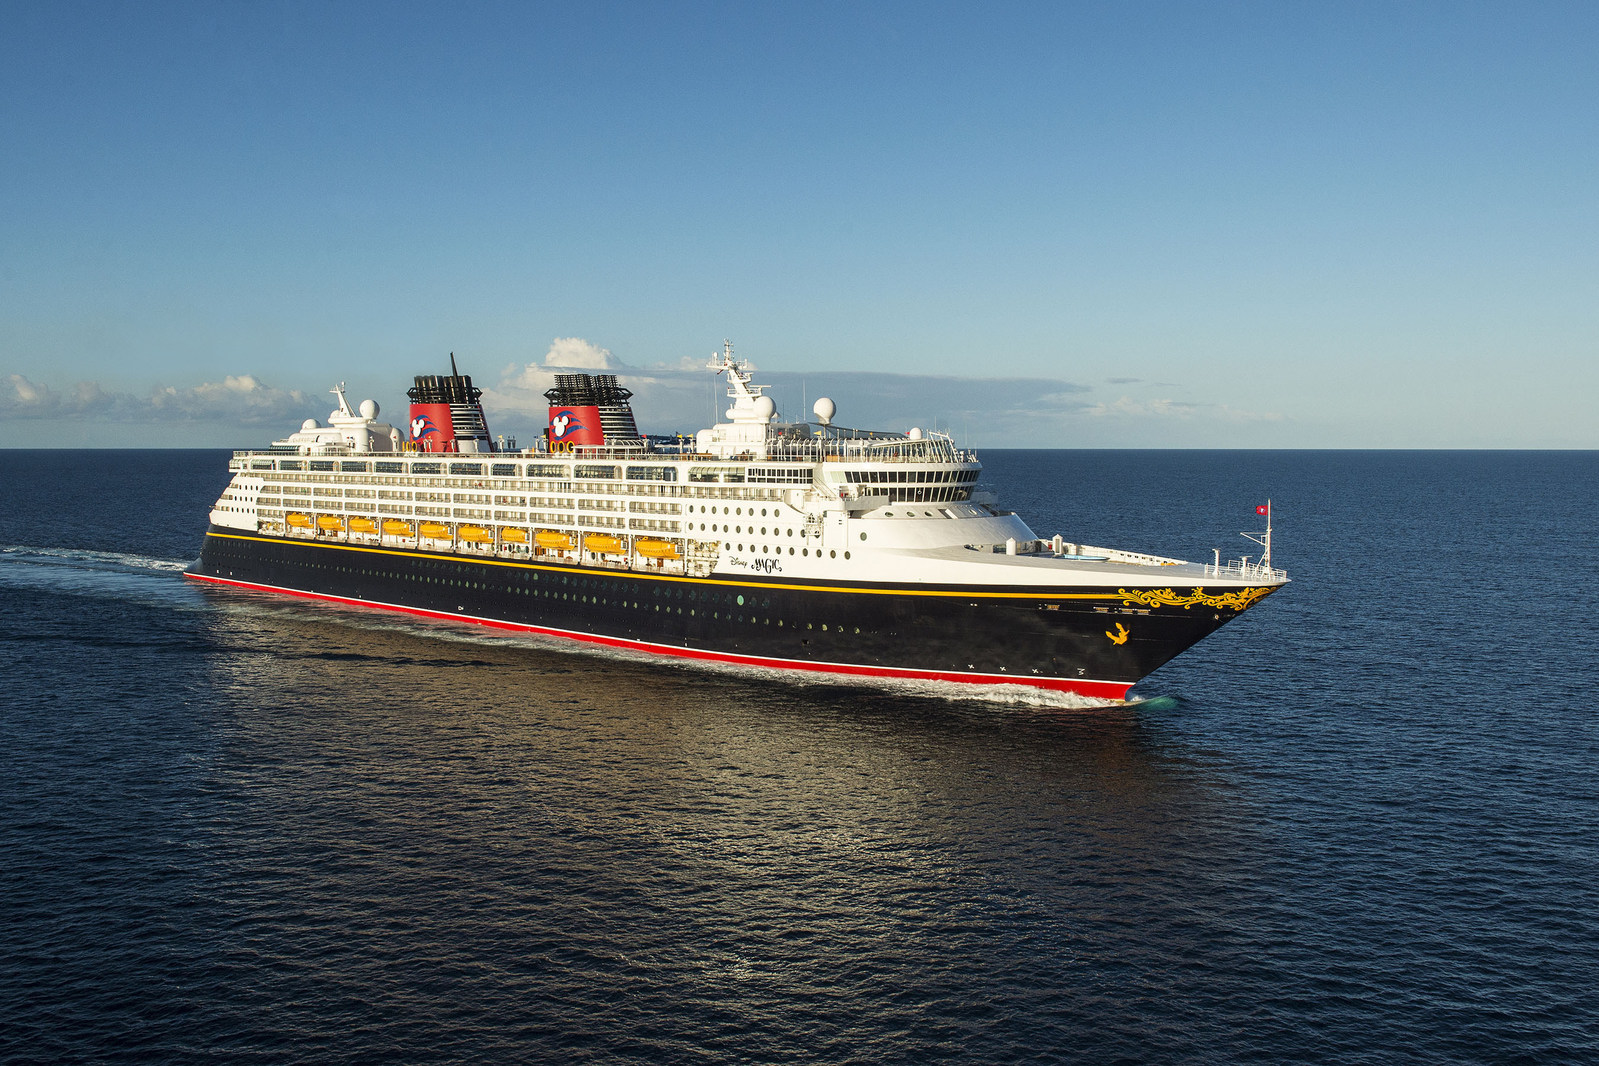 Disney Cruise Line Expands San Diego Season and Returns to Popular Tropical Ports from Both Coasts in Early 2019